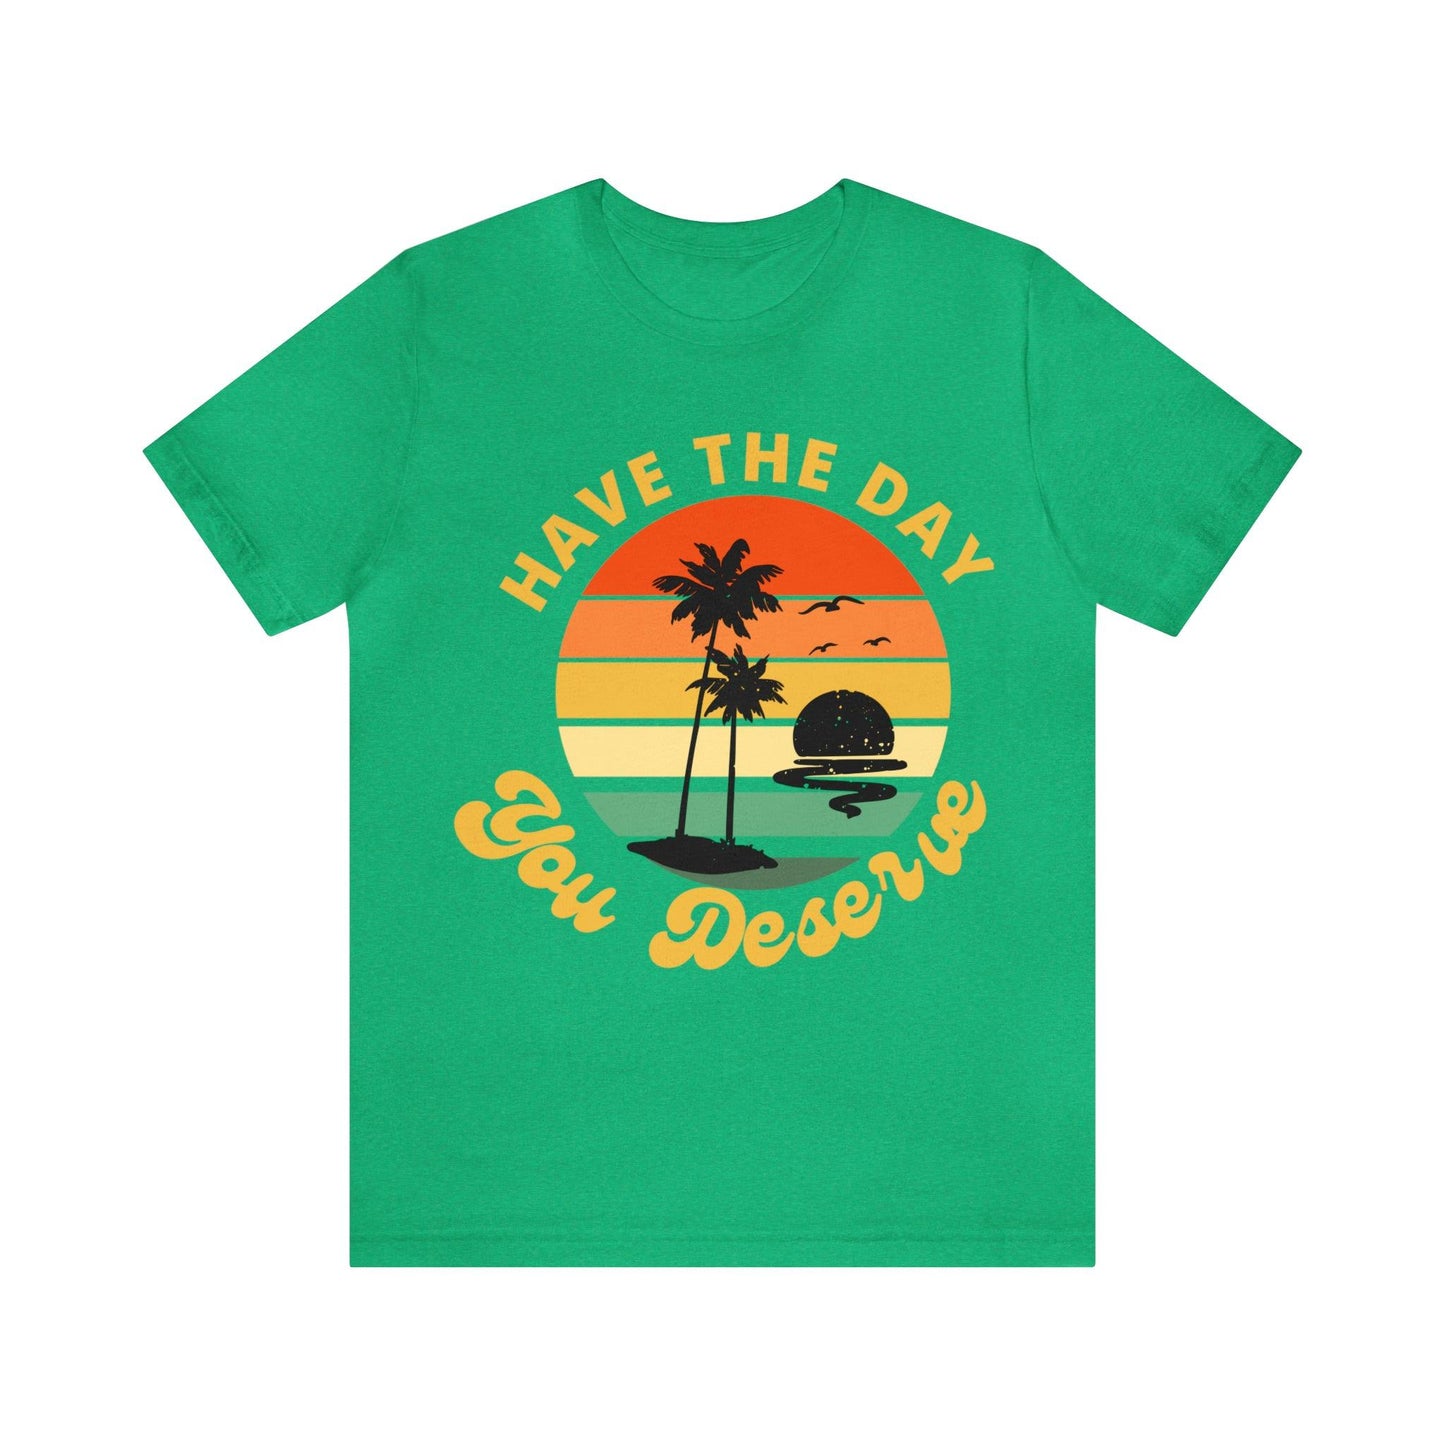 Inspirational Graphic Tee, Motivational Tee, Have the Day You Deserve Shirt, Positive Vibes Shirt, Trendy shirt and Eye Catching shirt Beach - Giftsmojo